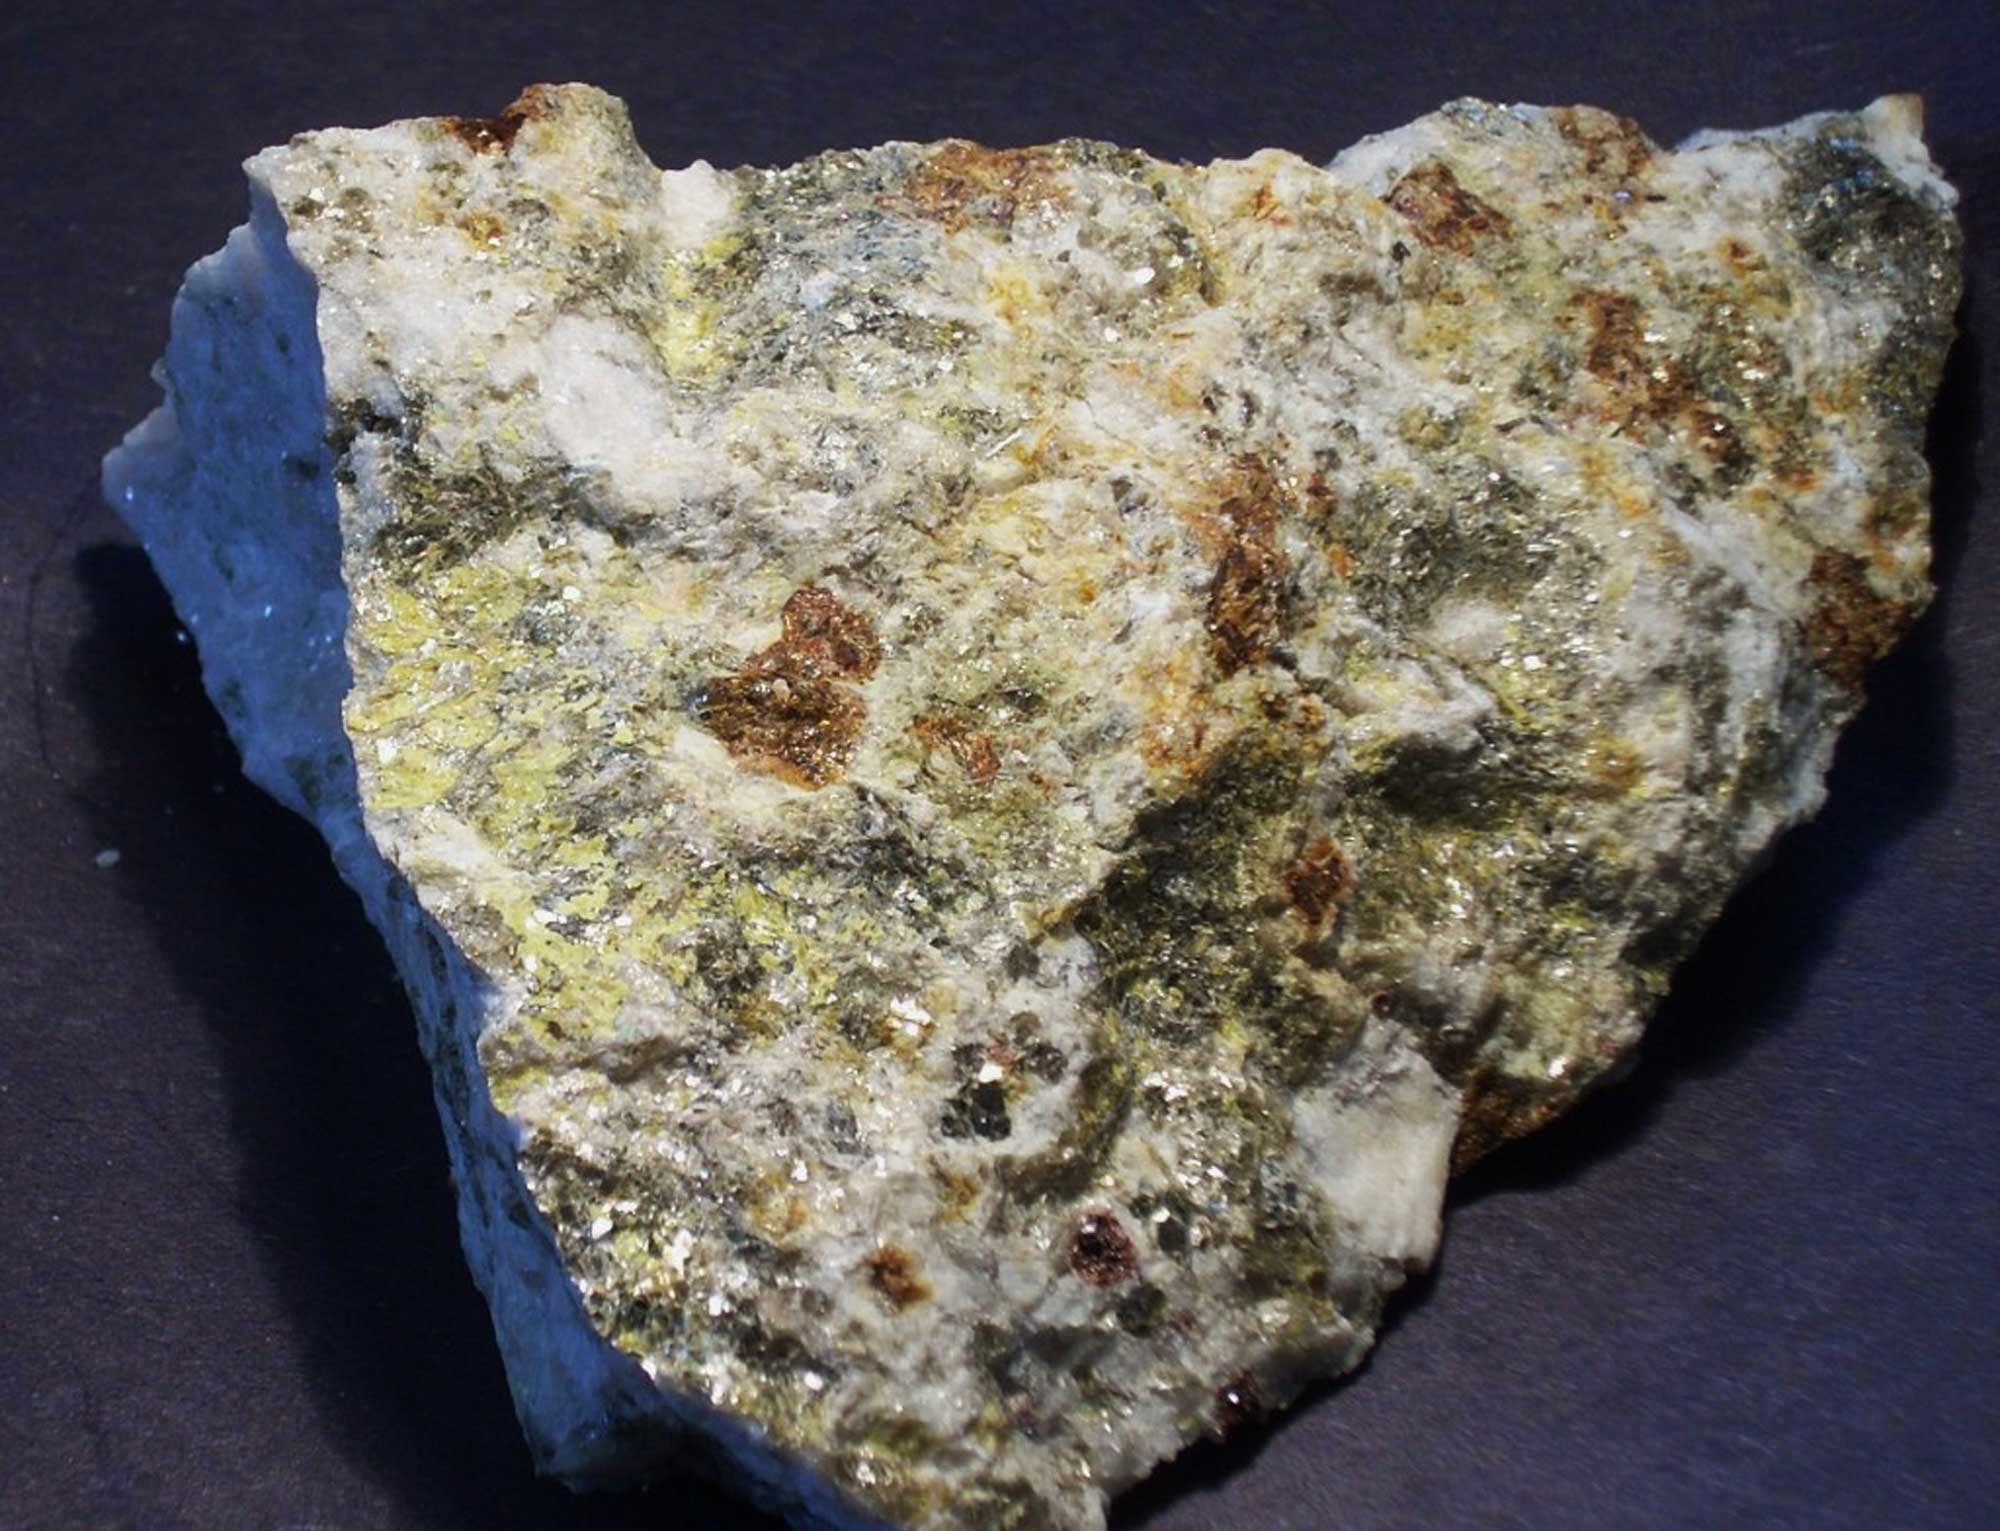 Photograph of a pegmatite rock sample from the Pine Mountain Mine in North Carolina.